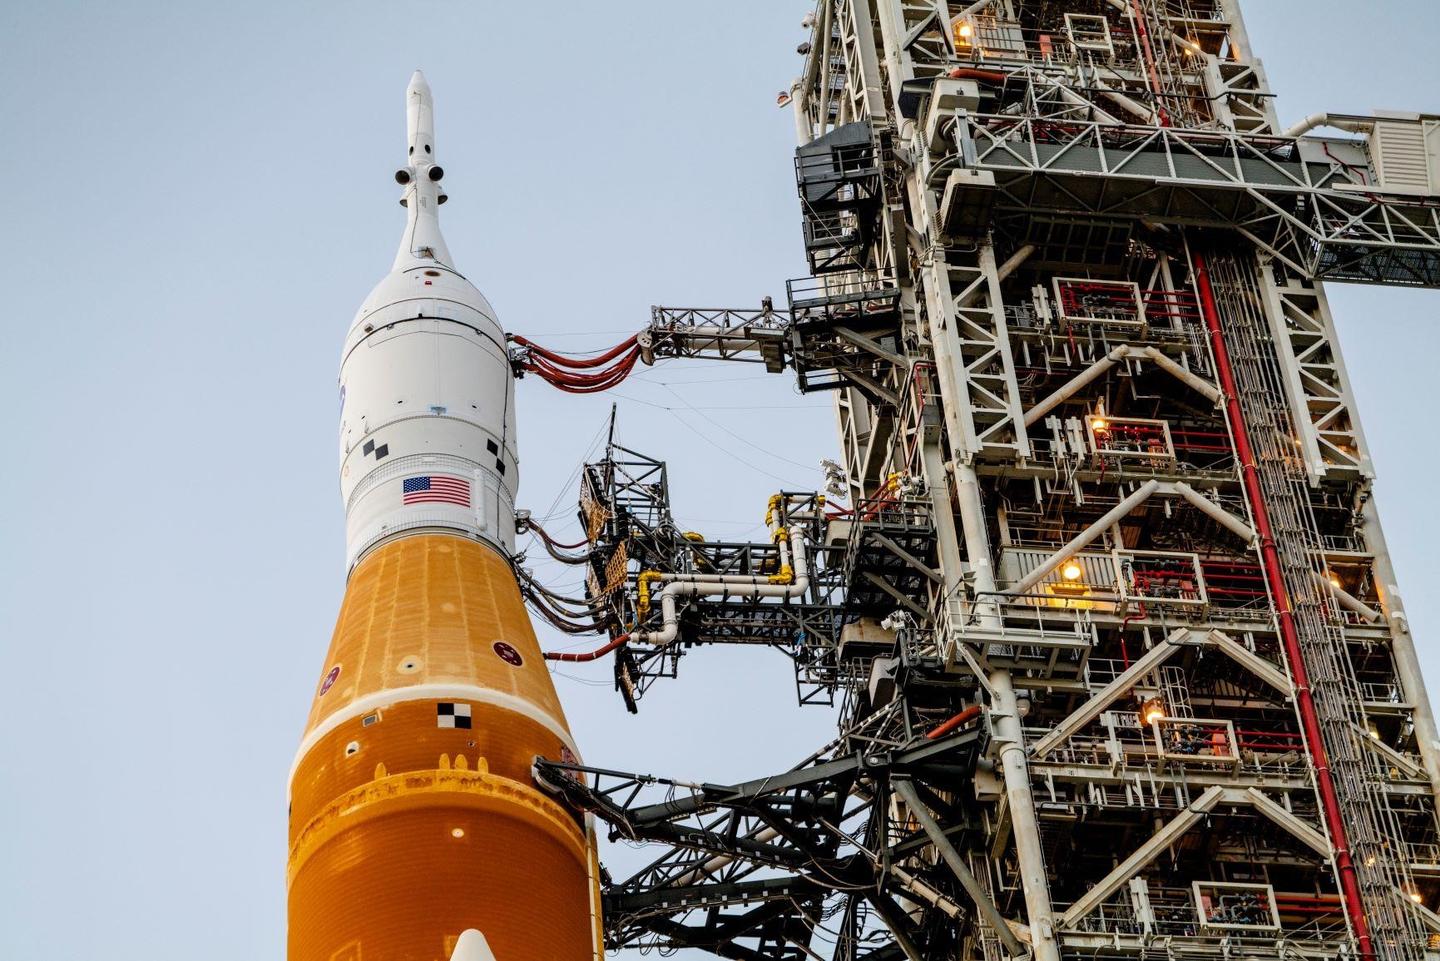 Fly me to the Moon! NASA's Orion spacecraft with the Airbus-built European Service Module is ready for launch